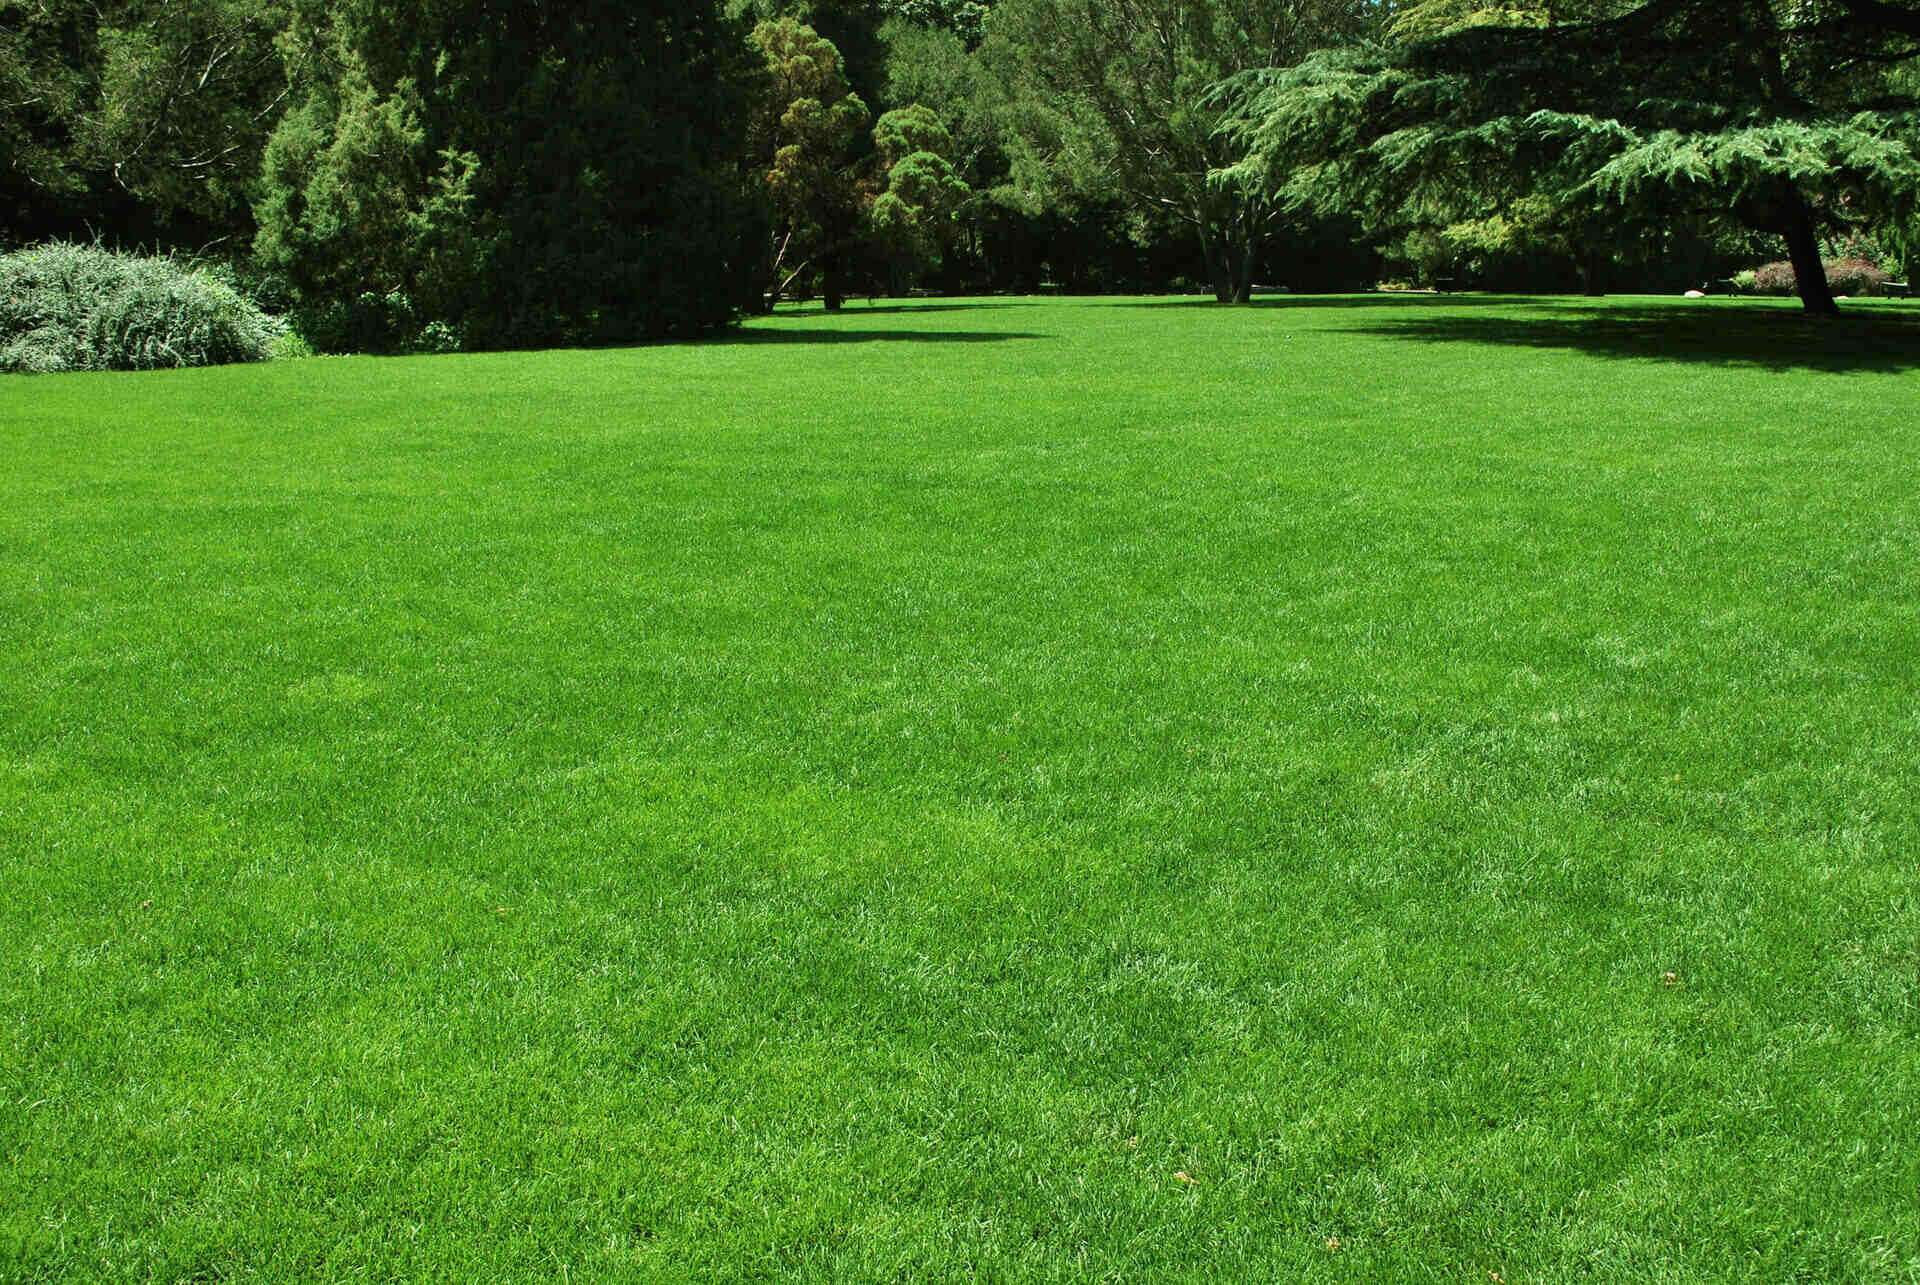 What Makes Lawns Green